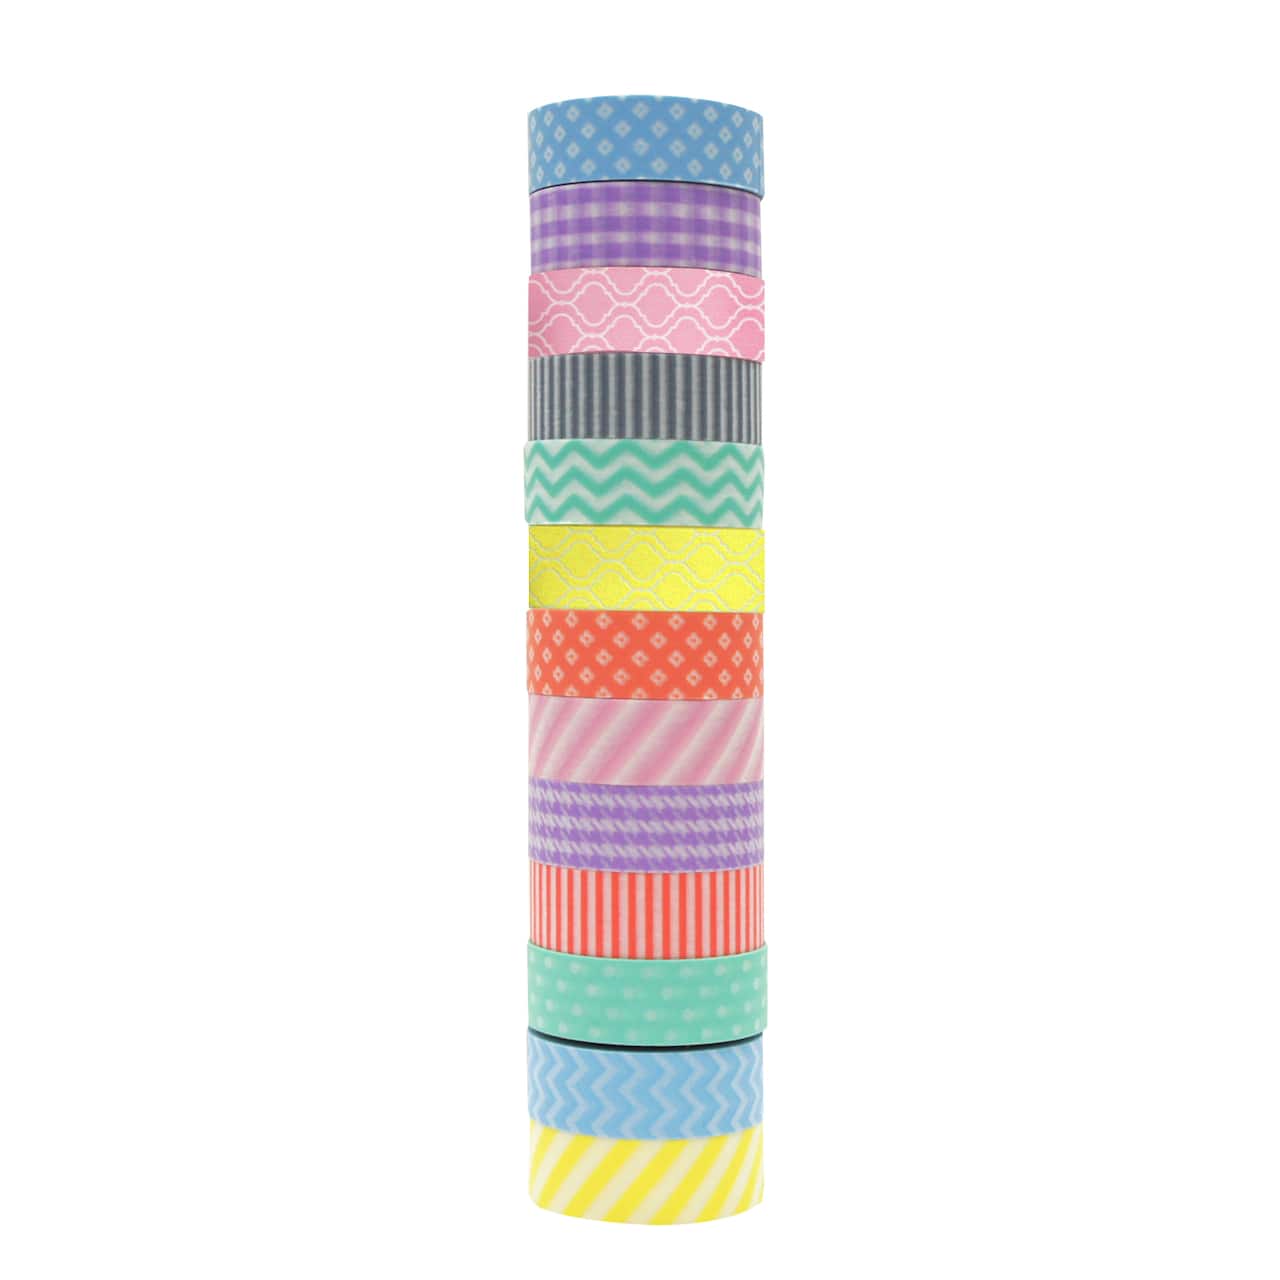 Pastels Crafting Tape Set by Recollections&#x2122;